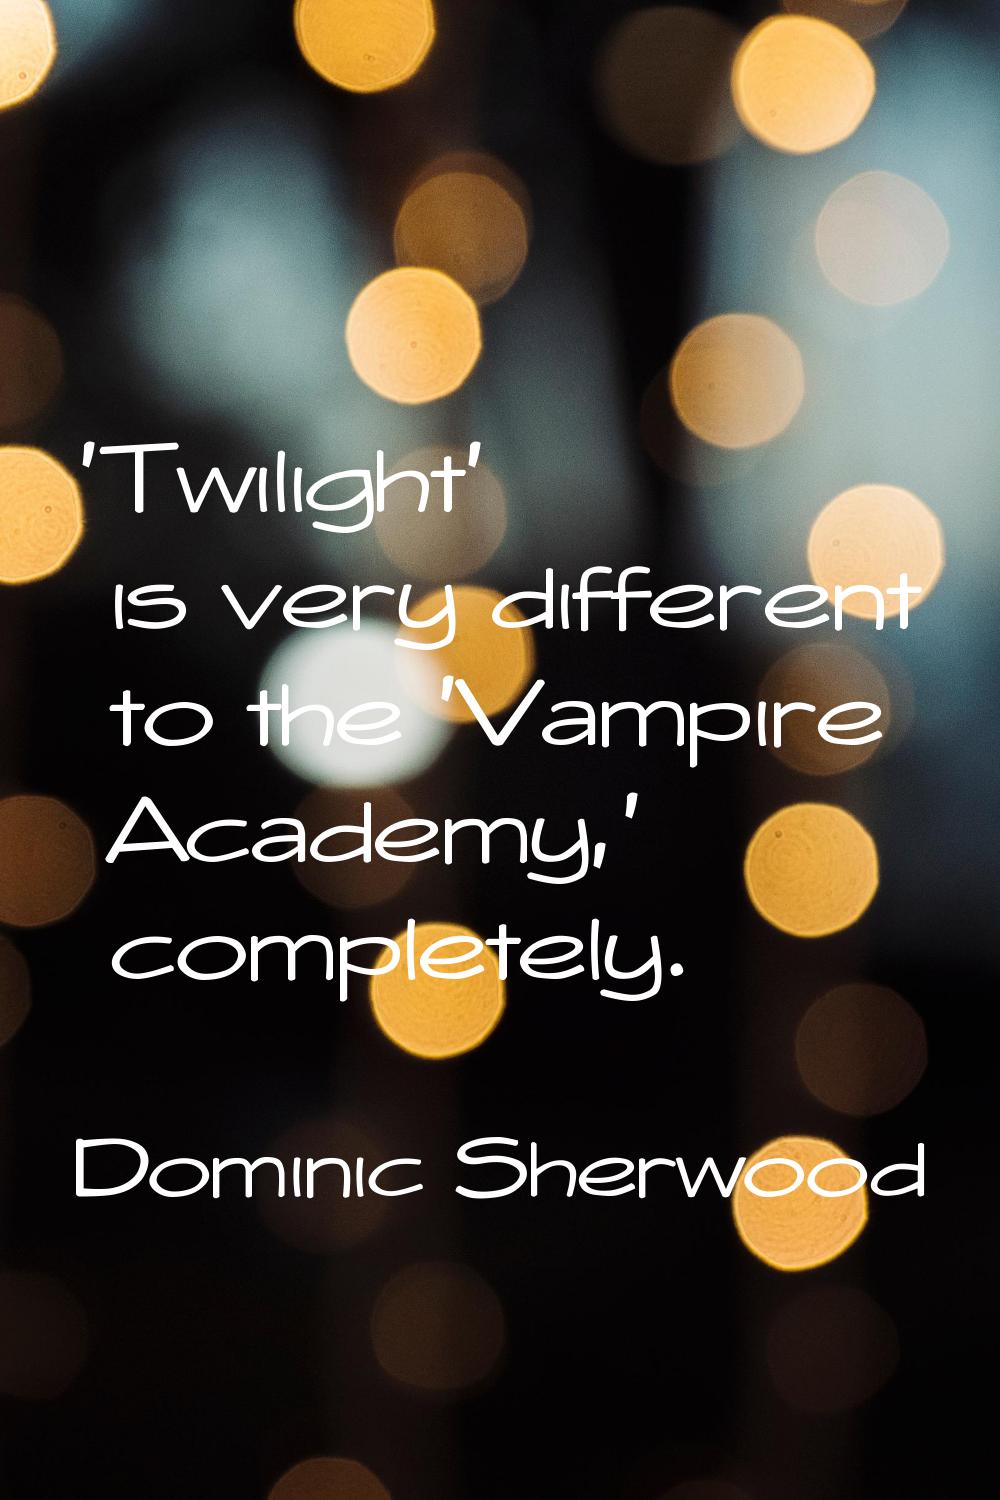 'Twilight' is very different to the 'Vampire Academy,' completely.